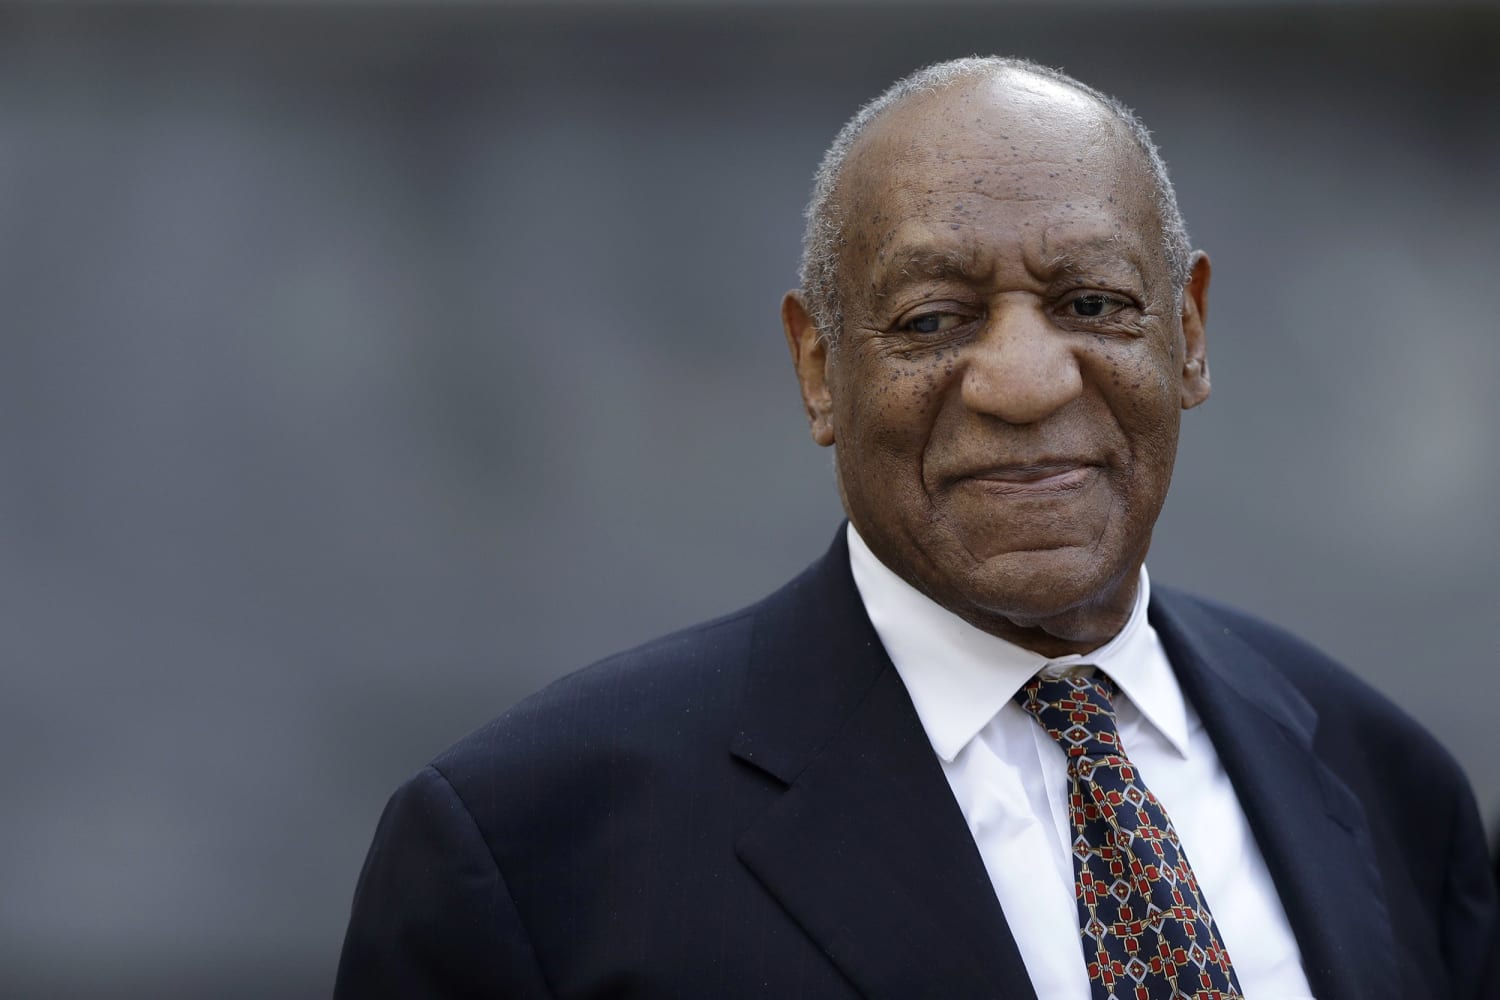 Bill Cosby S Conviction Was Hailed As A Metoo Victory But Advocates Say More Needs To Be Done